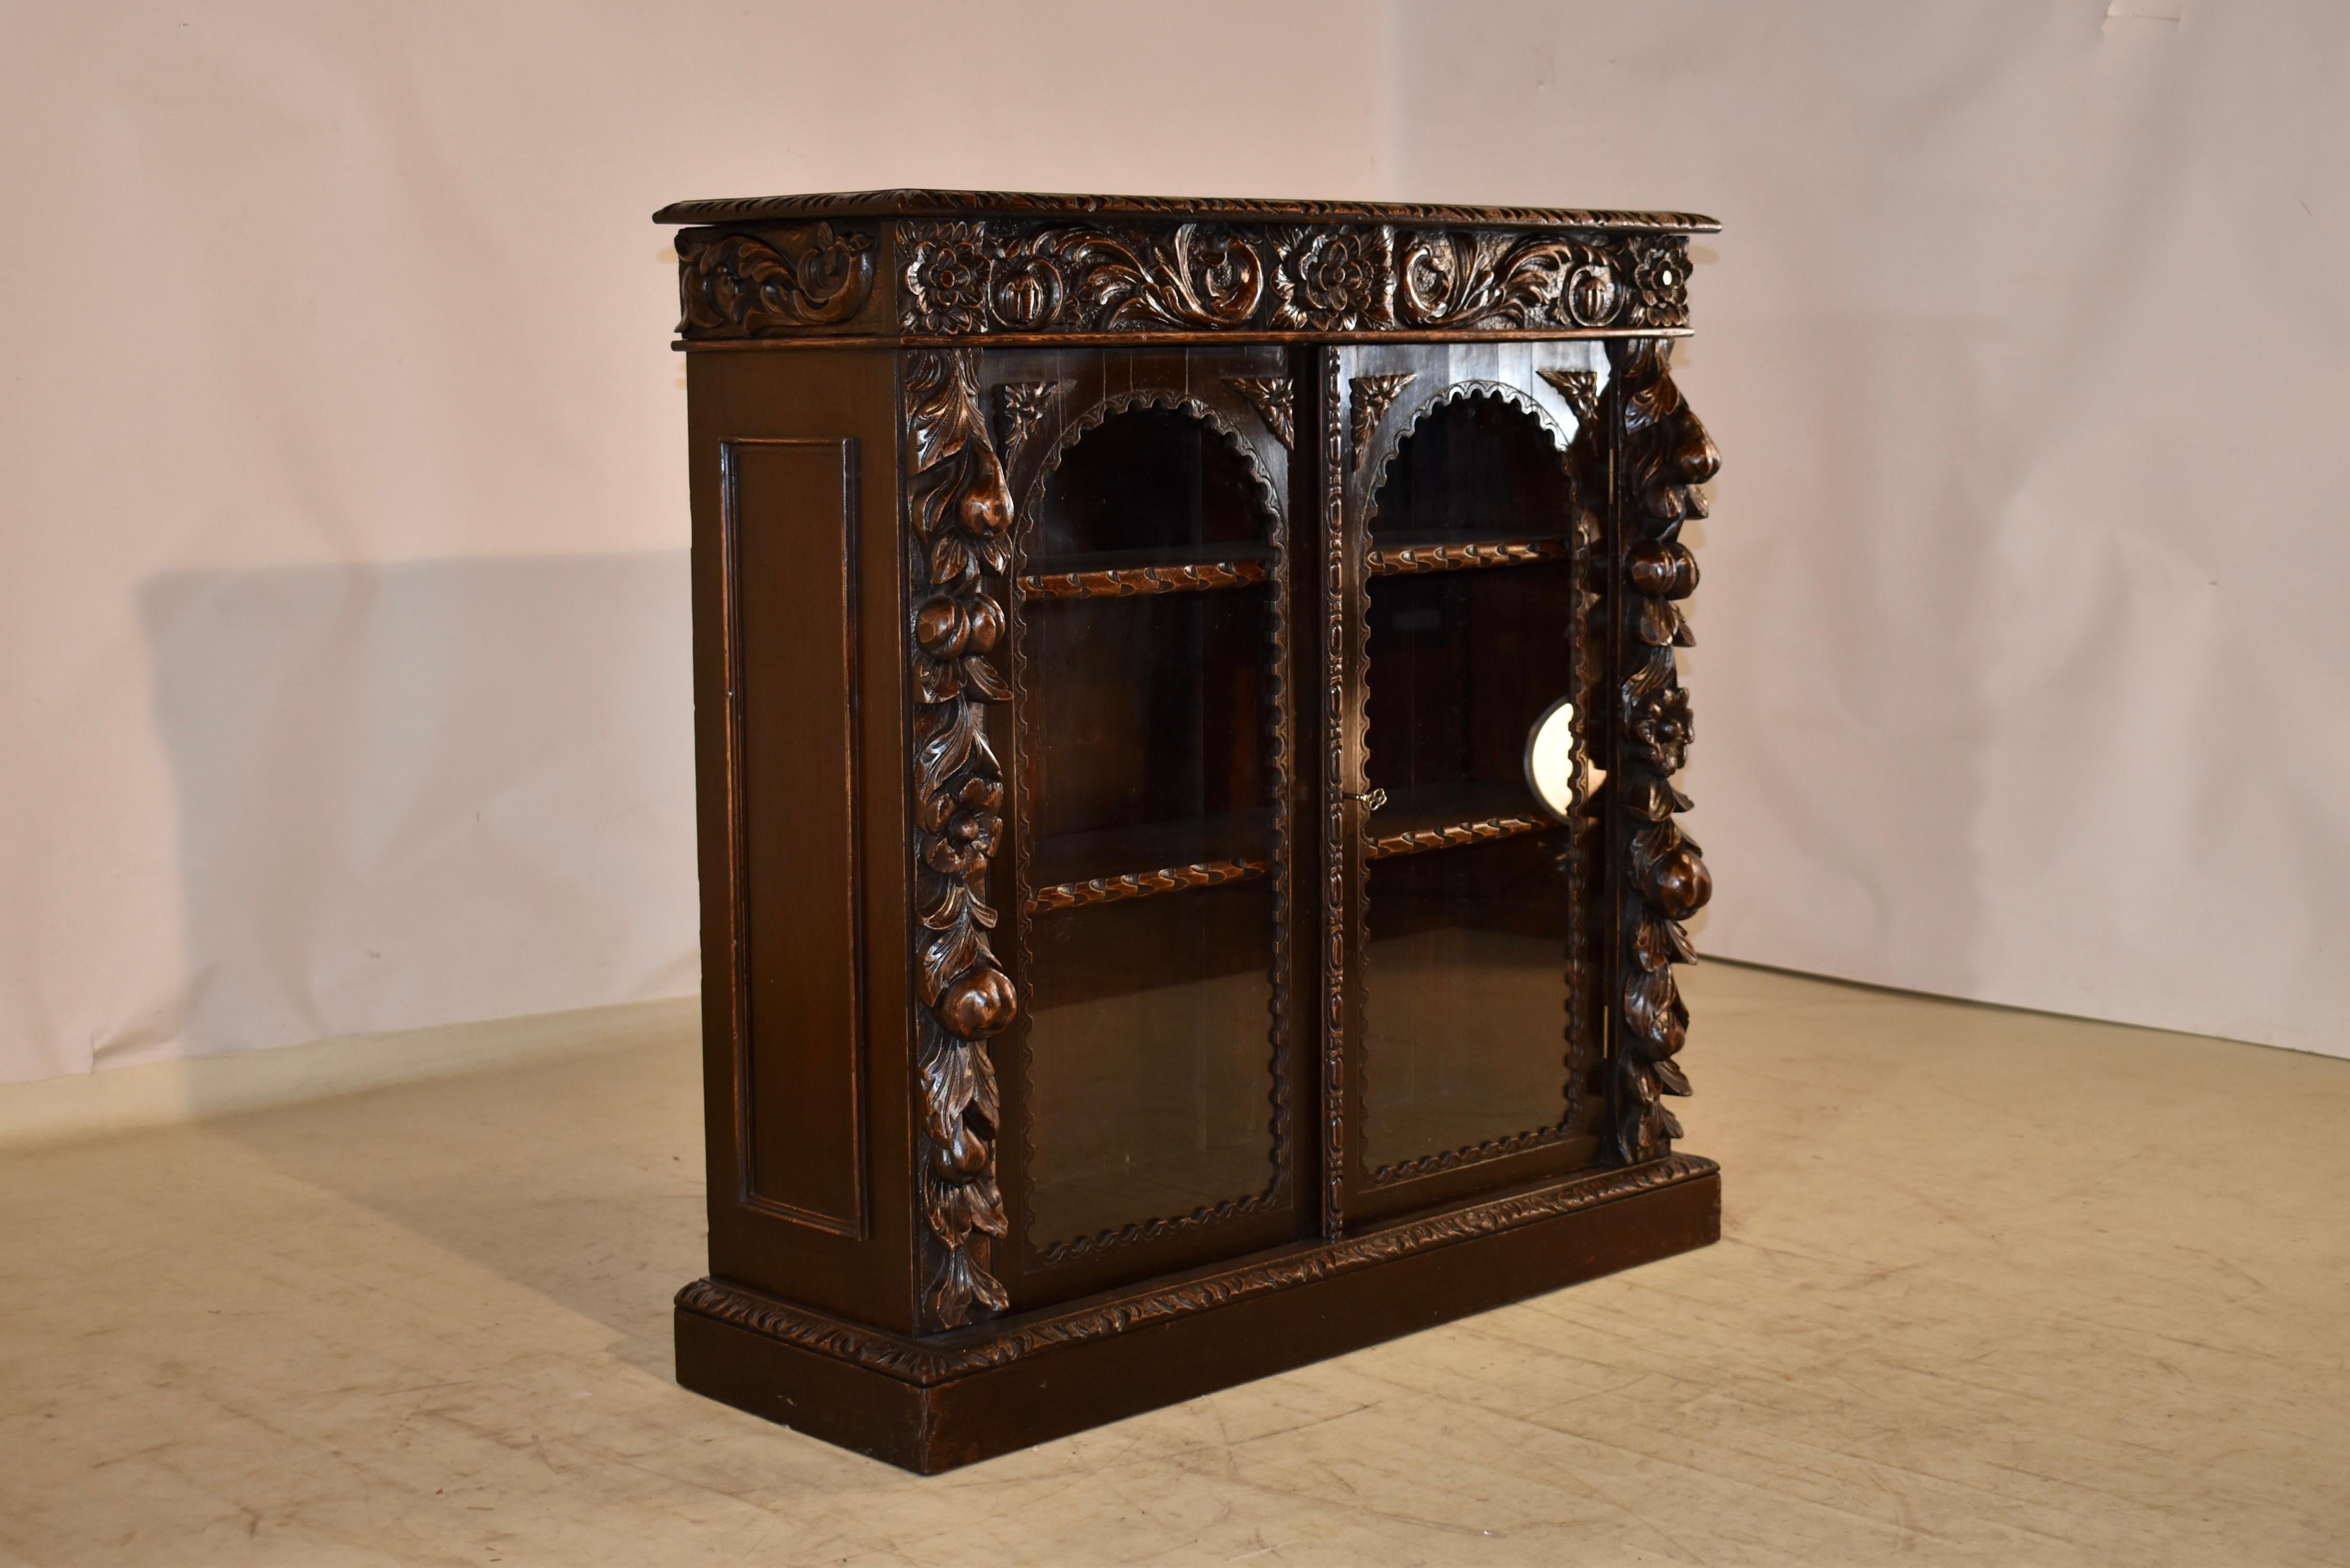 19th century oak bookcase from France with glazed doors.  The top is made from a single board and has a beveled and hand carved decorated edge.  This follows down to a gloriously hand carved apron.  The apron is over simple sides which have added